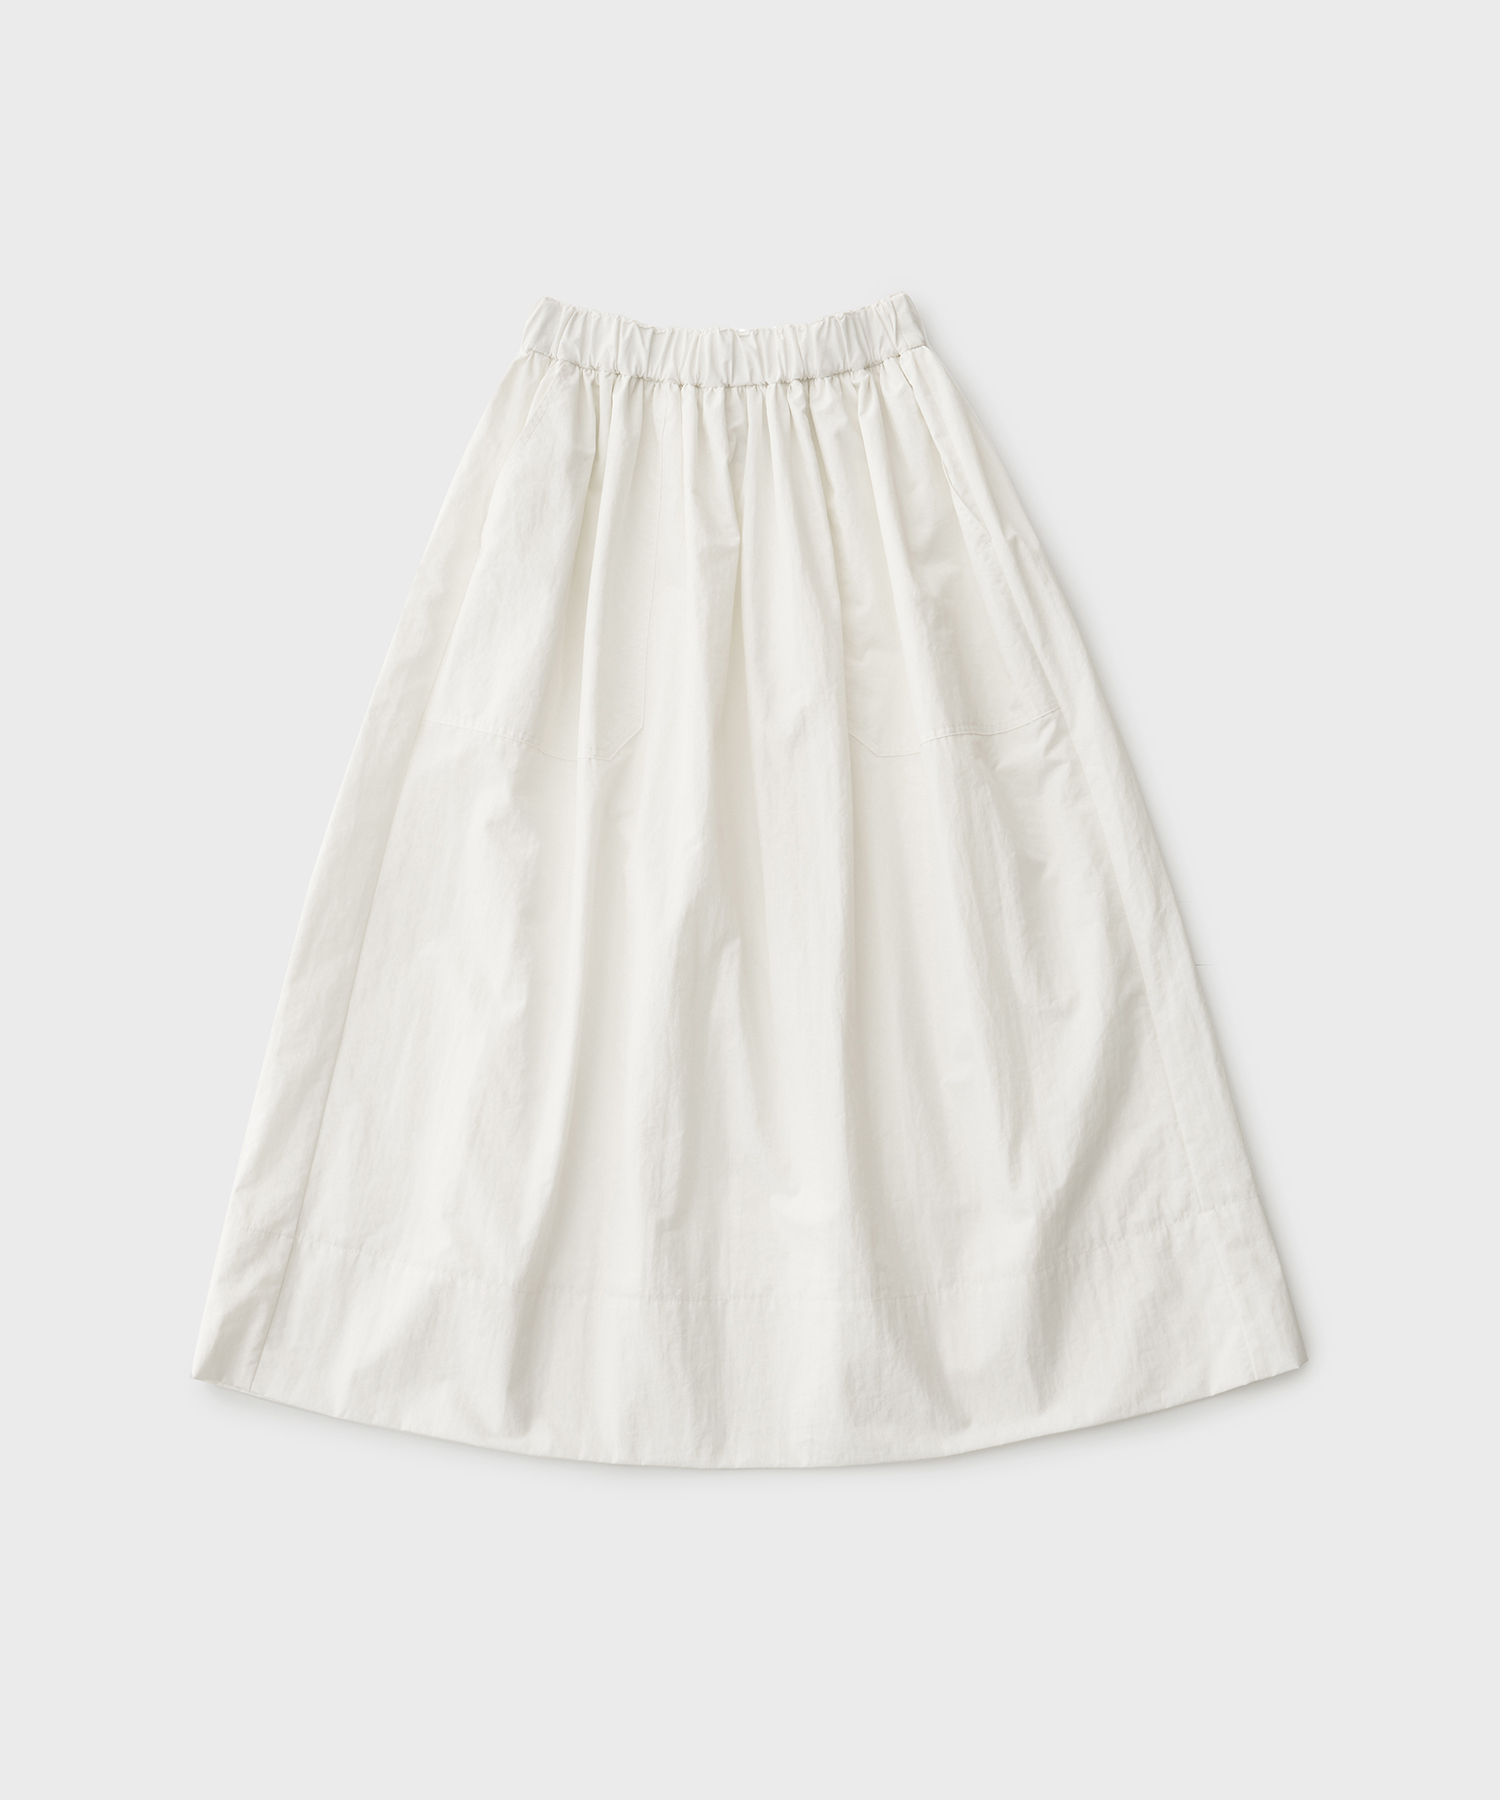 23SS Fatigue Banded Skirt (Off White)